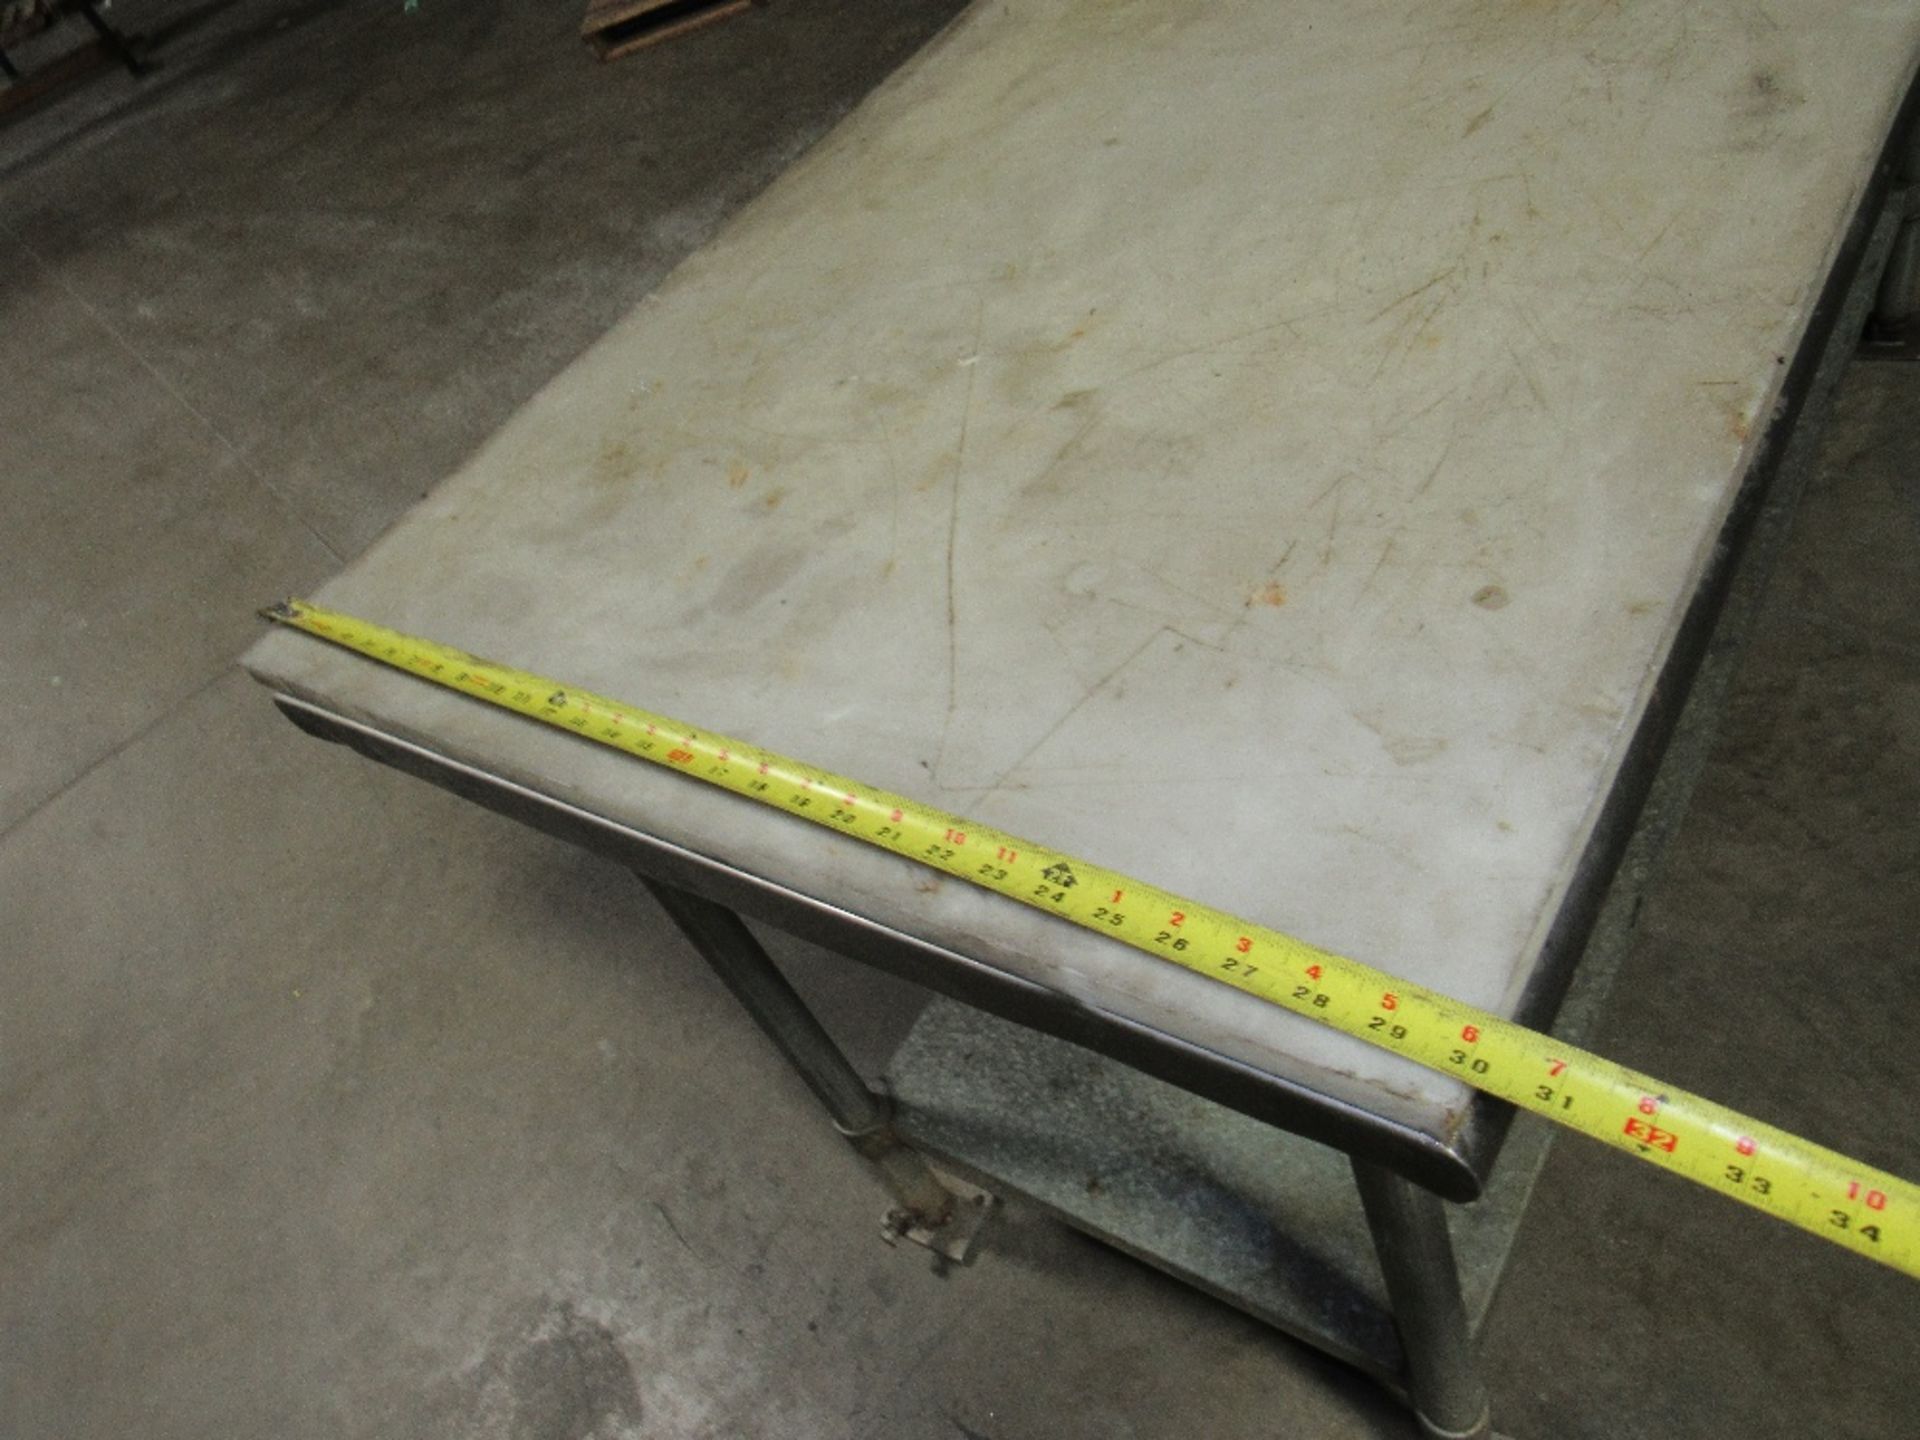 Stainless Steel Table with Teflon removable Plate Cover - Galvanized second surface -- (RIGGING - Image 3 of 14